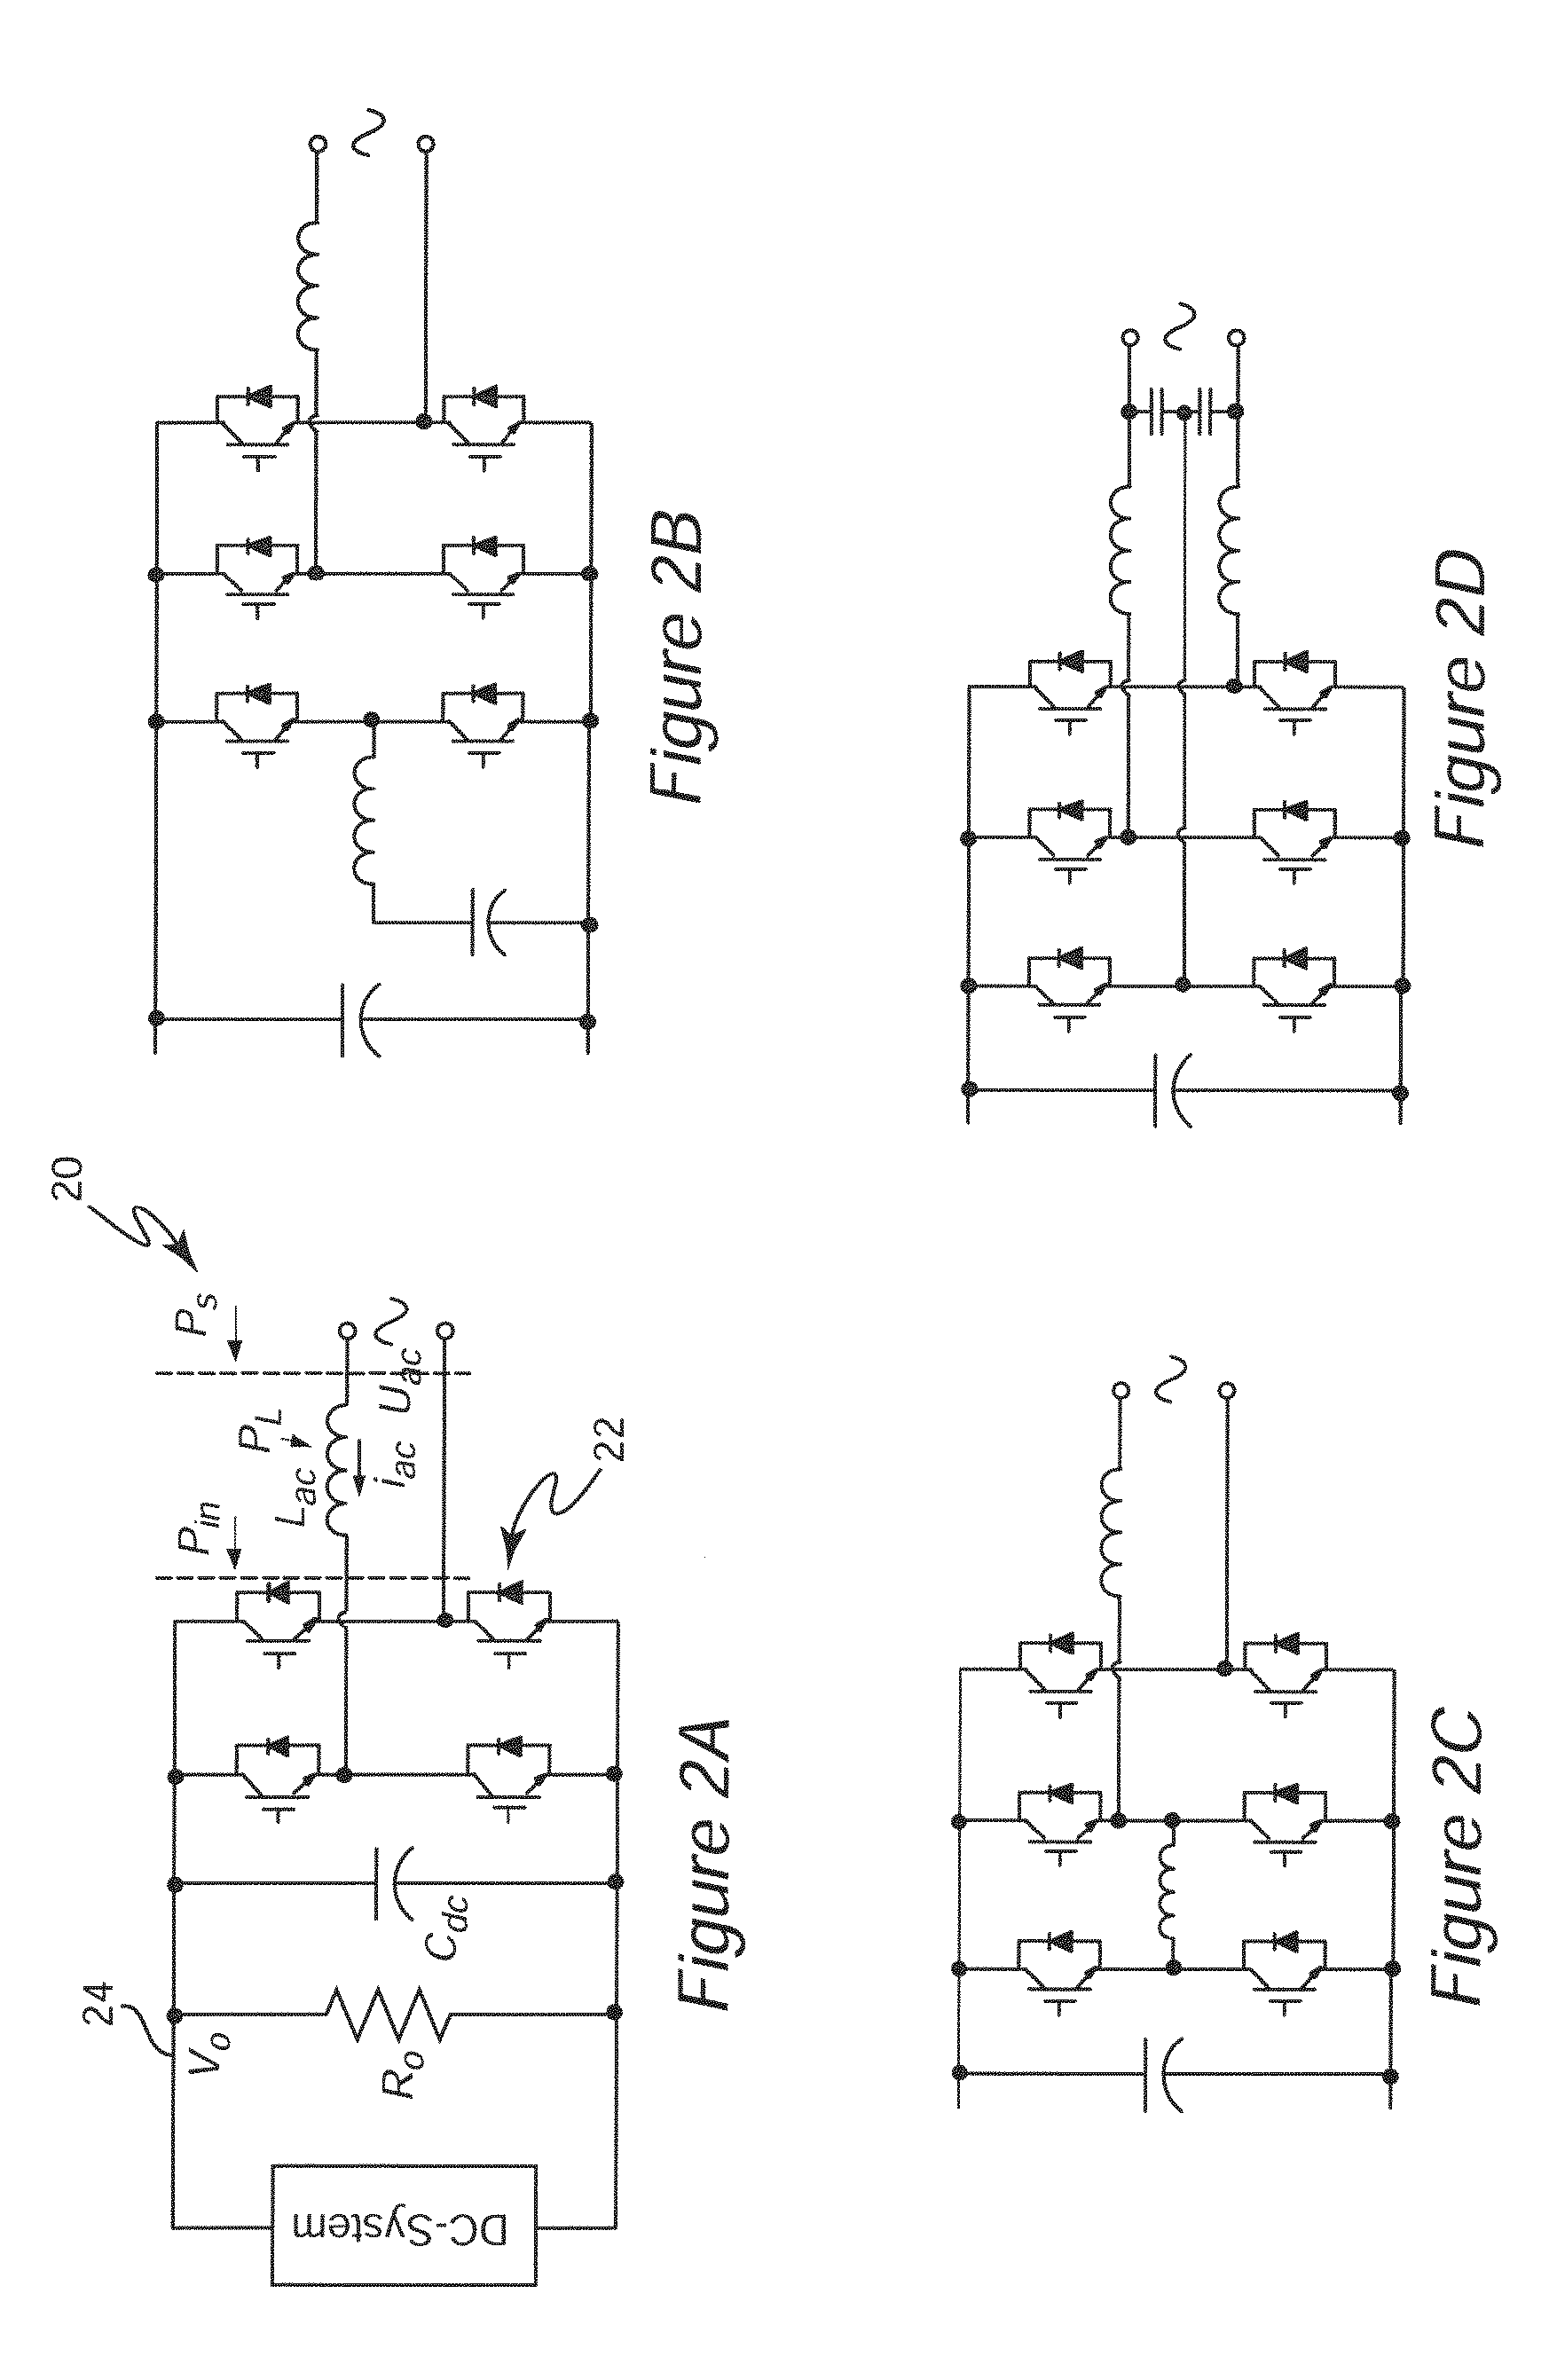 Two-stage single phase bi-directional PWM power converter with DC link capacitor reduction